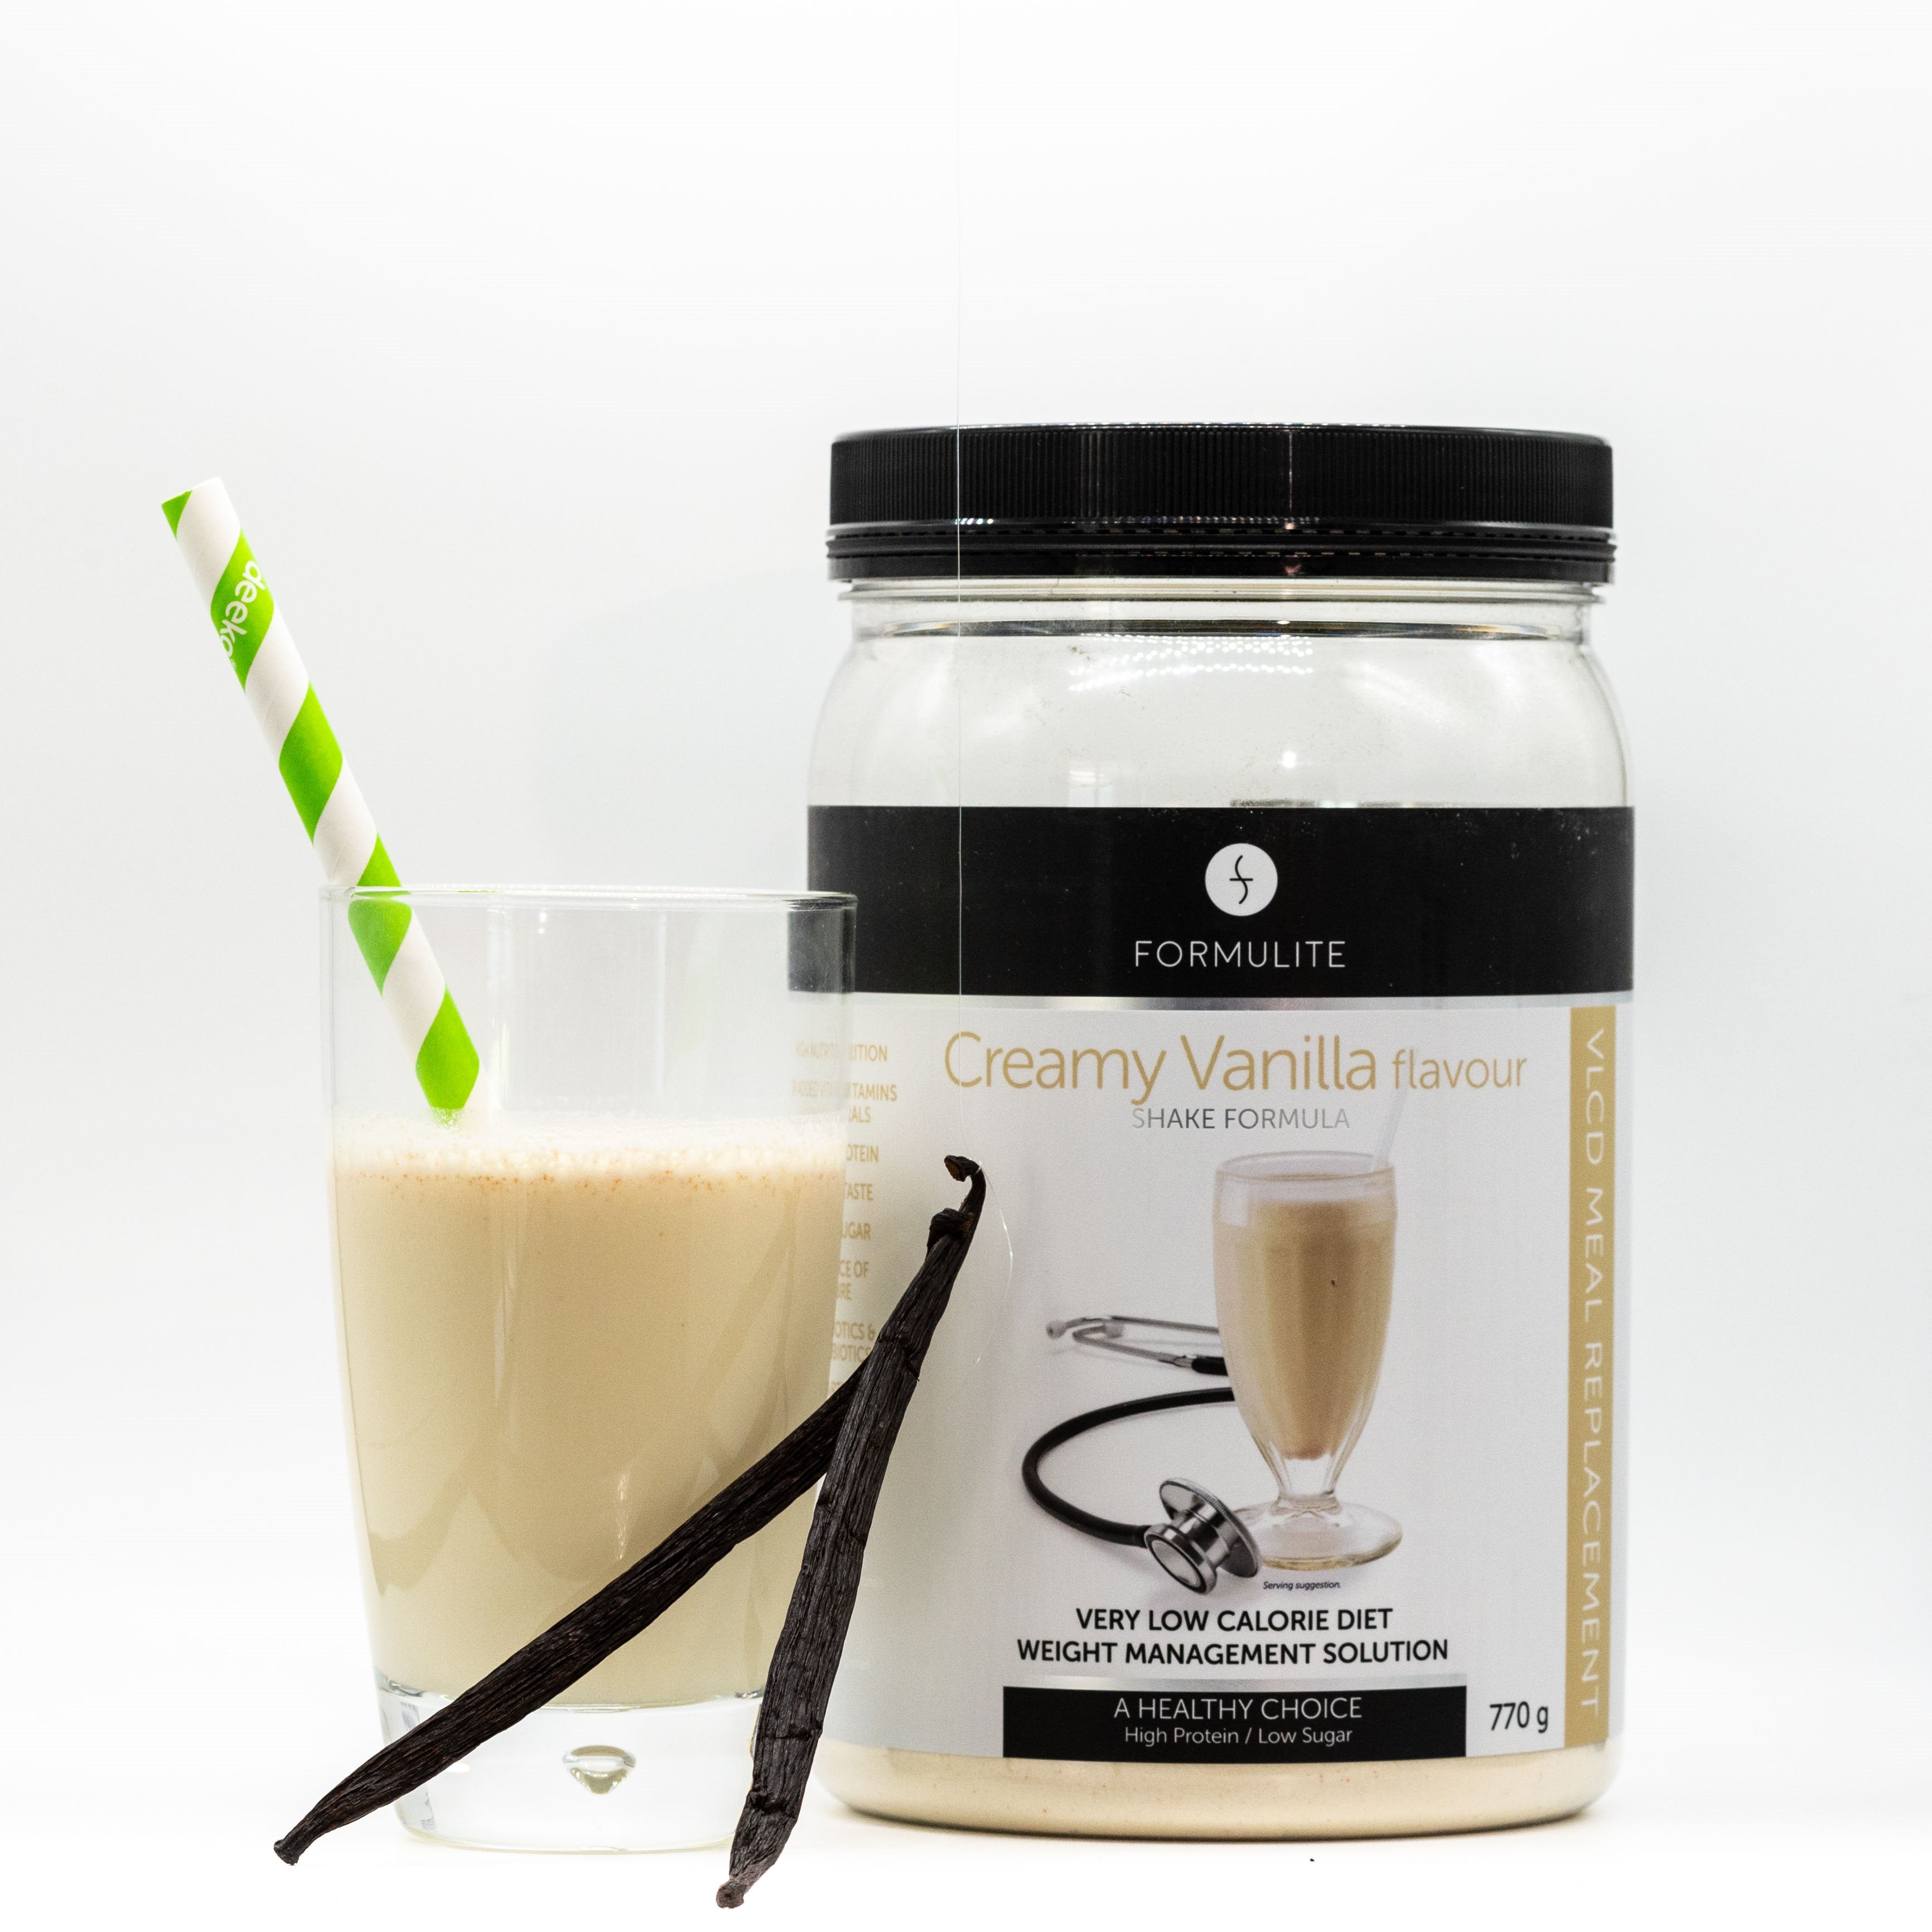 Shakes & Protein Package